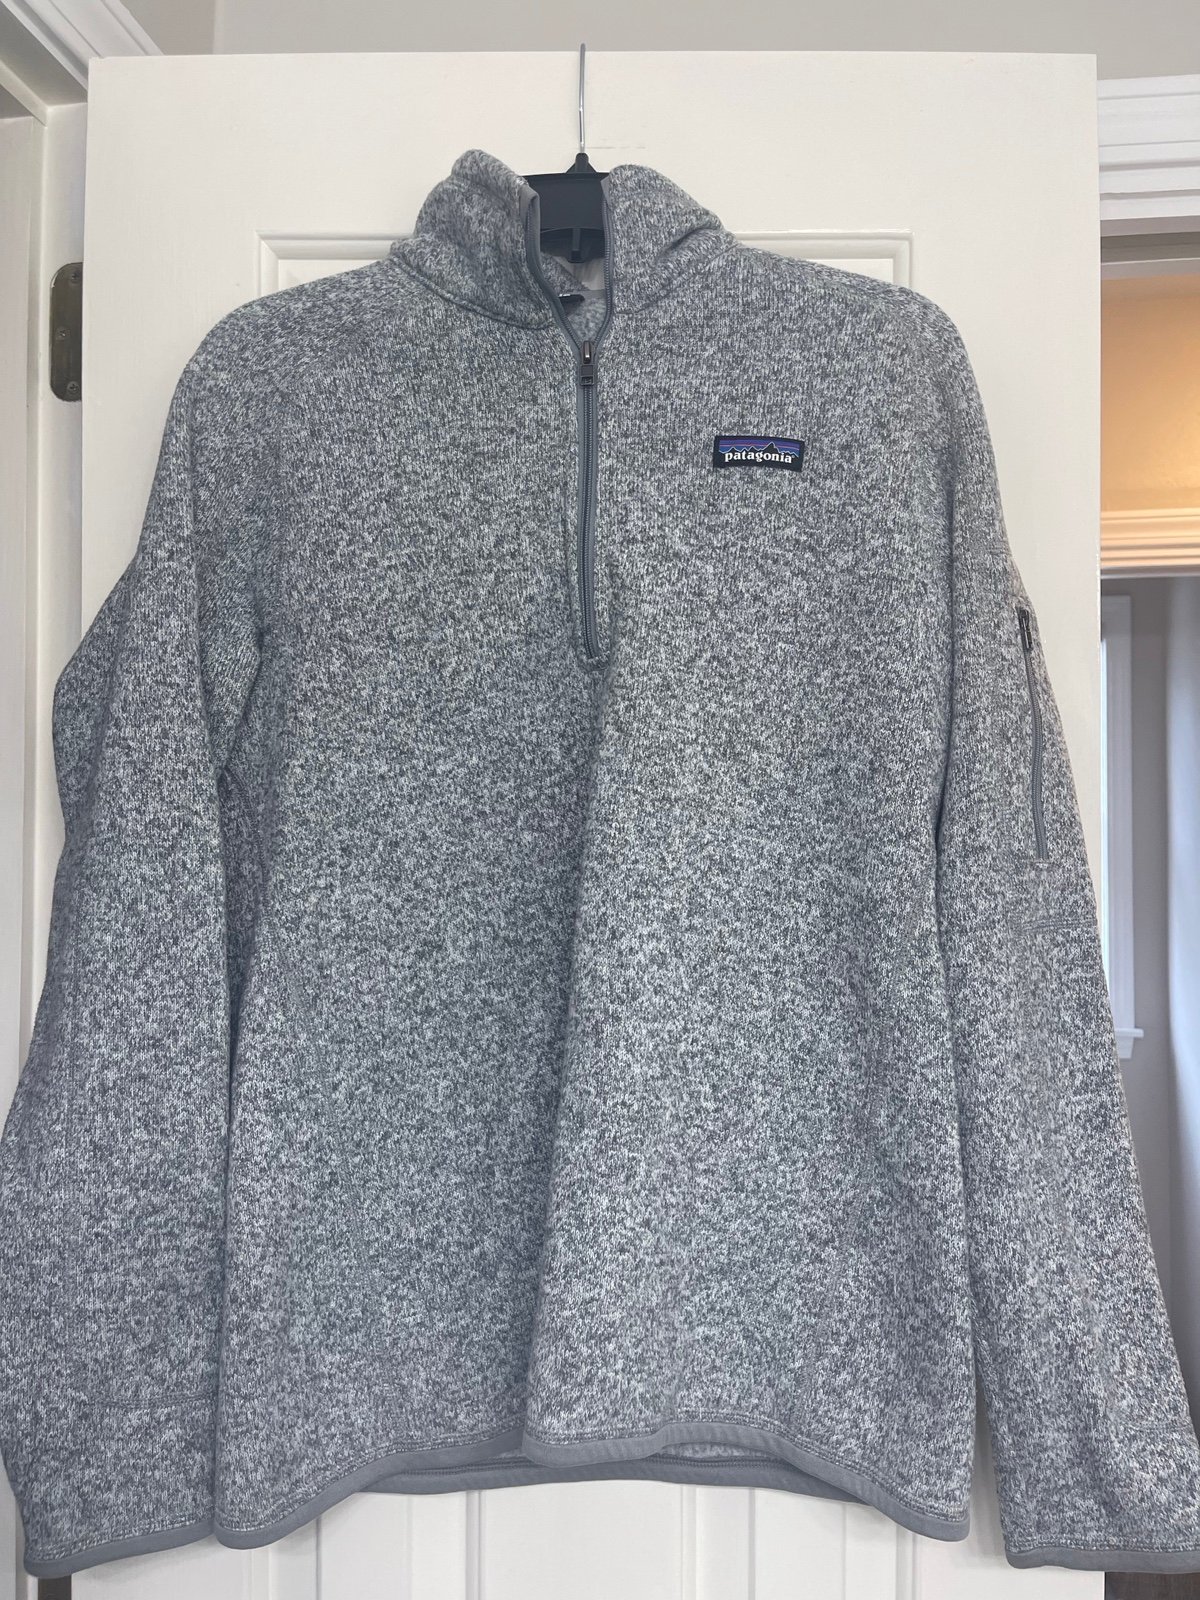 Cheap Patagonia pullover sweaters hCTV8ctO1 all for you